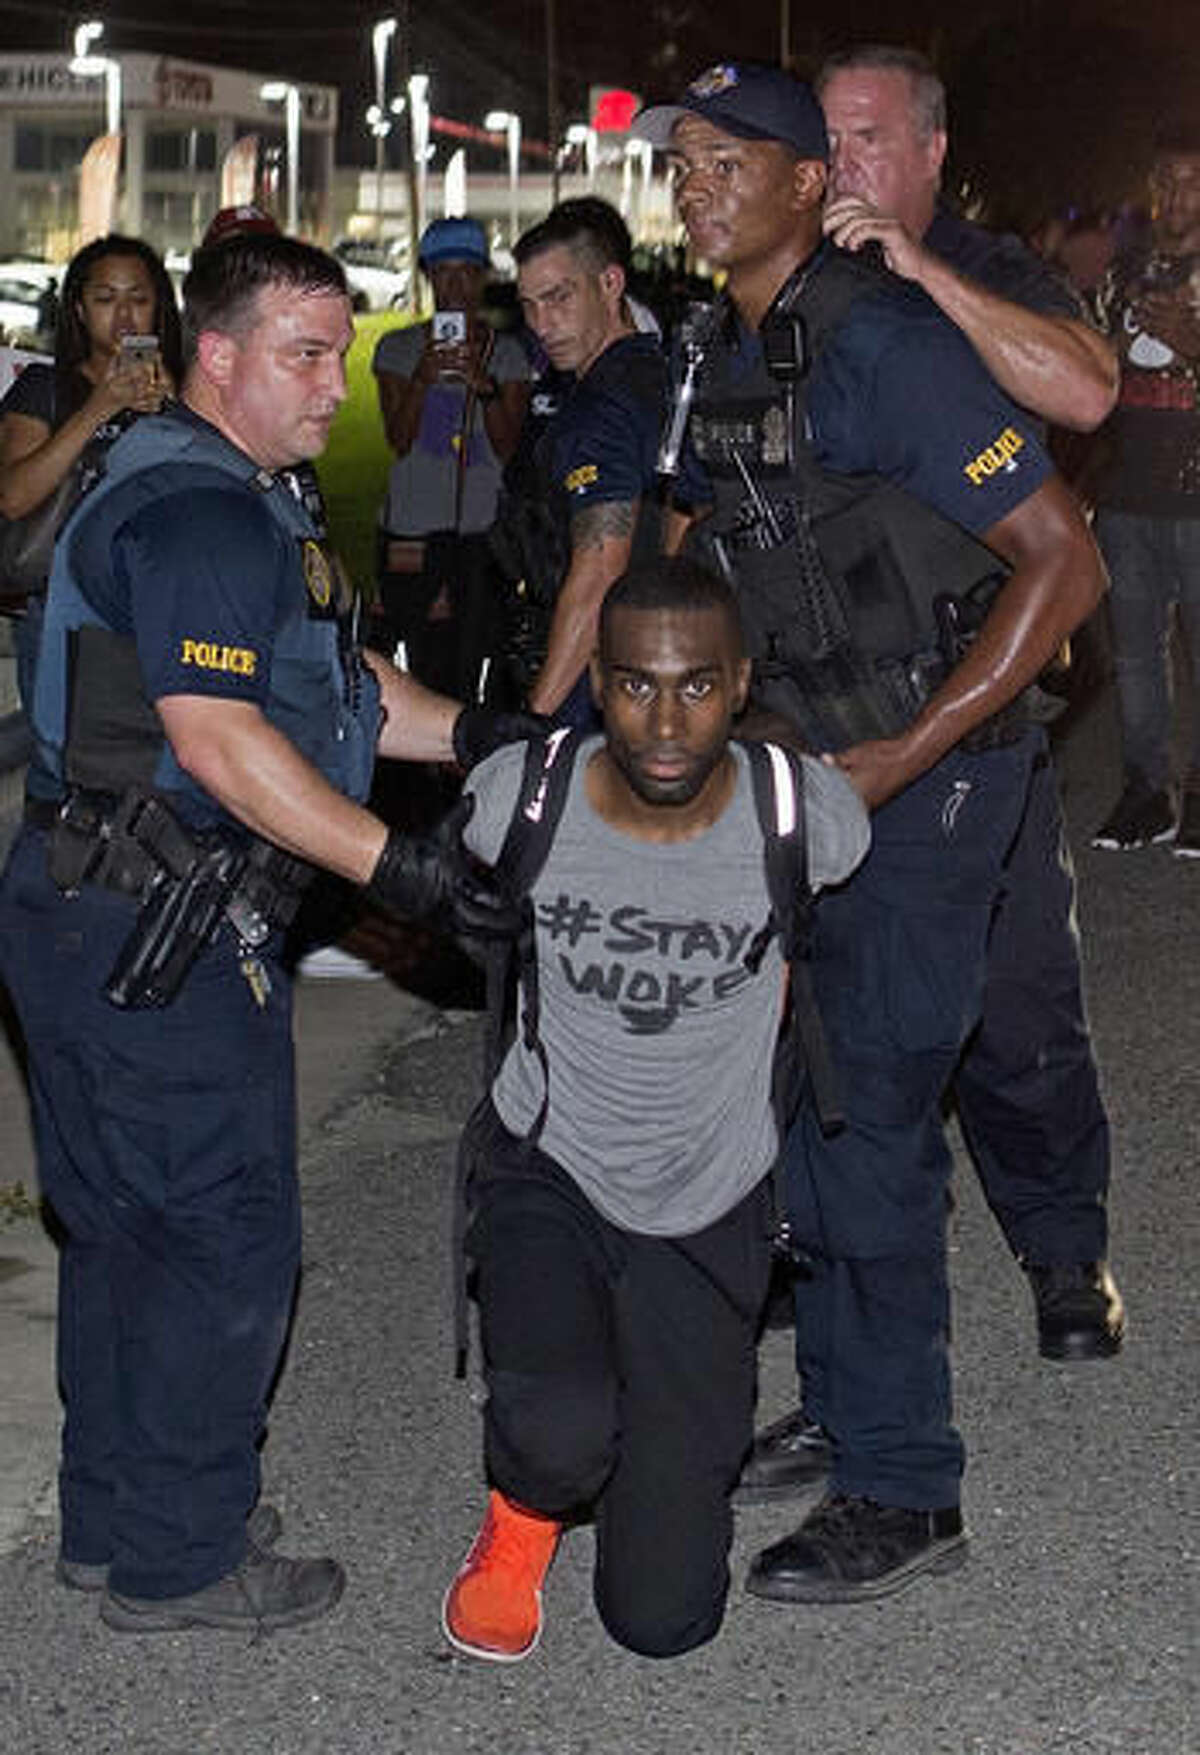 FILE - In this Saturday, July 9, 2016, file photo, police officers arrest activist DeRay McKesson during a protest along Airline Highway, a major road that passes in front of the Baton Rouge Police Department headquarters in Baton Rouge, La. Mckesson sued the city of Baton Rouge and police officials on Thursday, Aug. 4, 2016, saying officers responded in a "militarized and aggressive manner" in arresting him and other people protesting a police shooting death. (AP Photo/Max Becherer, File)